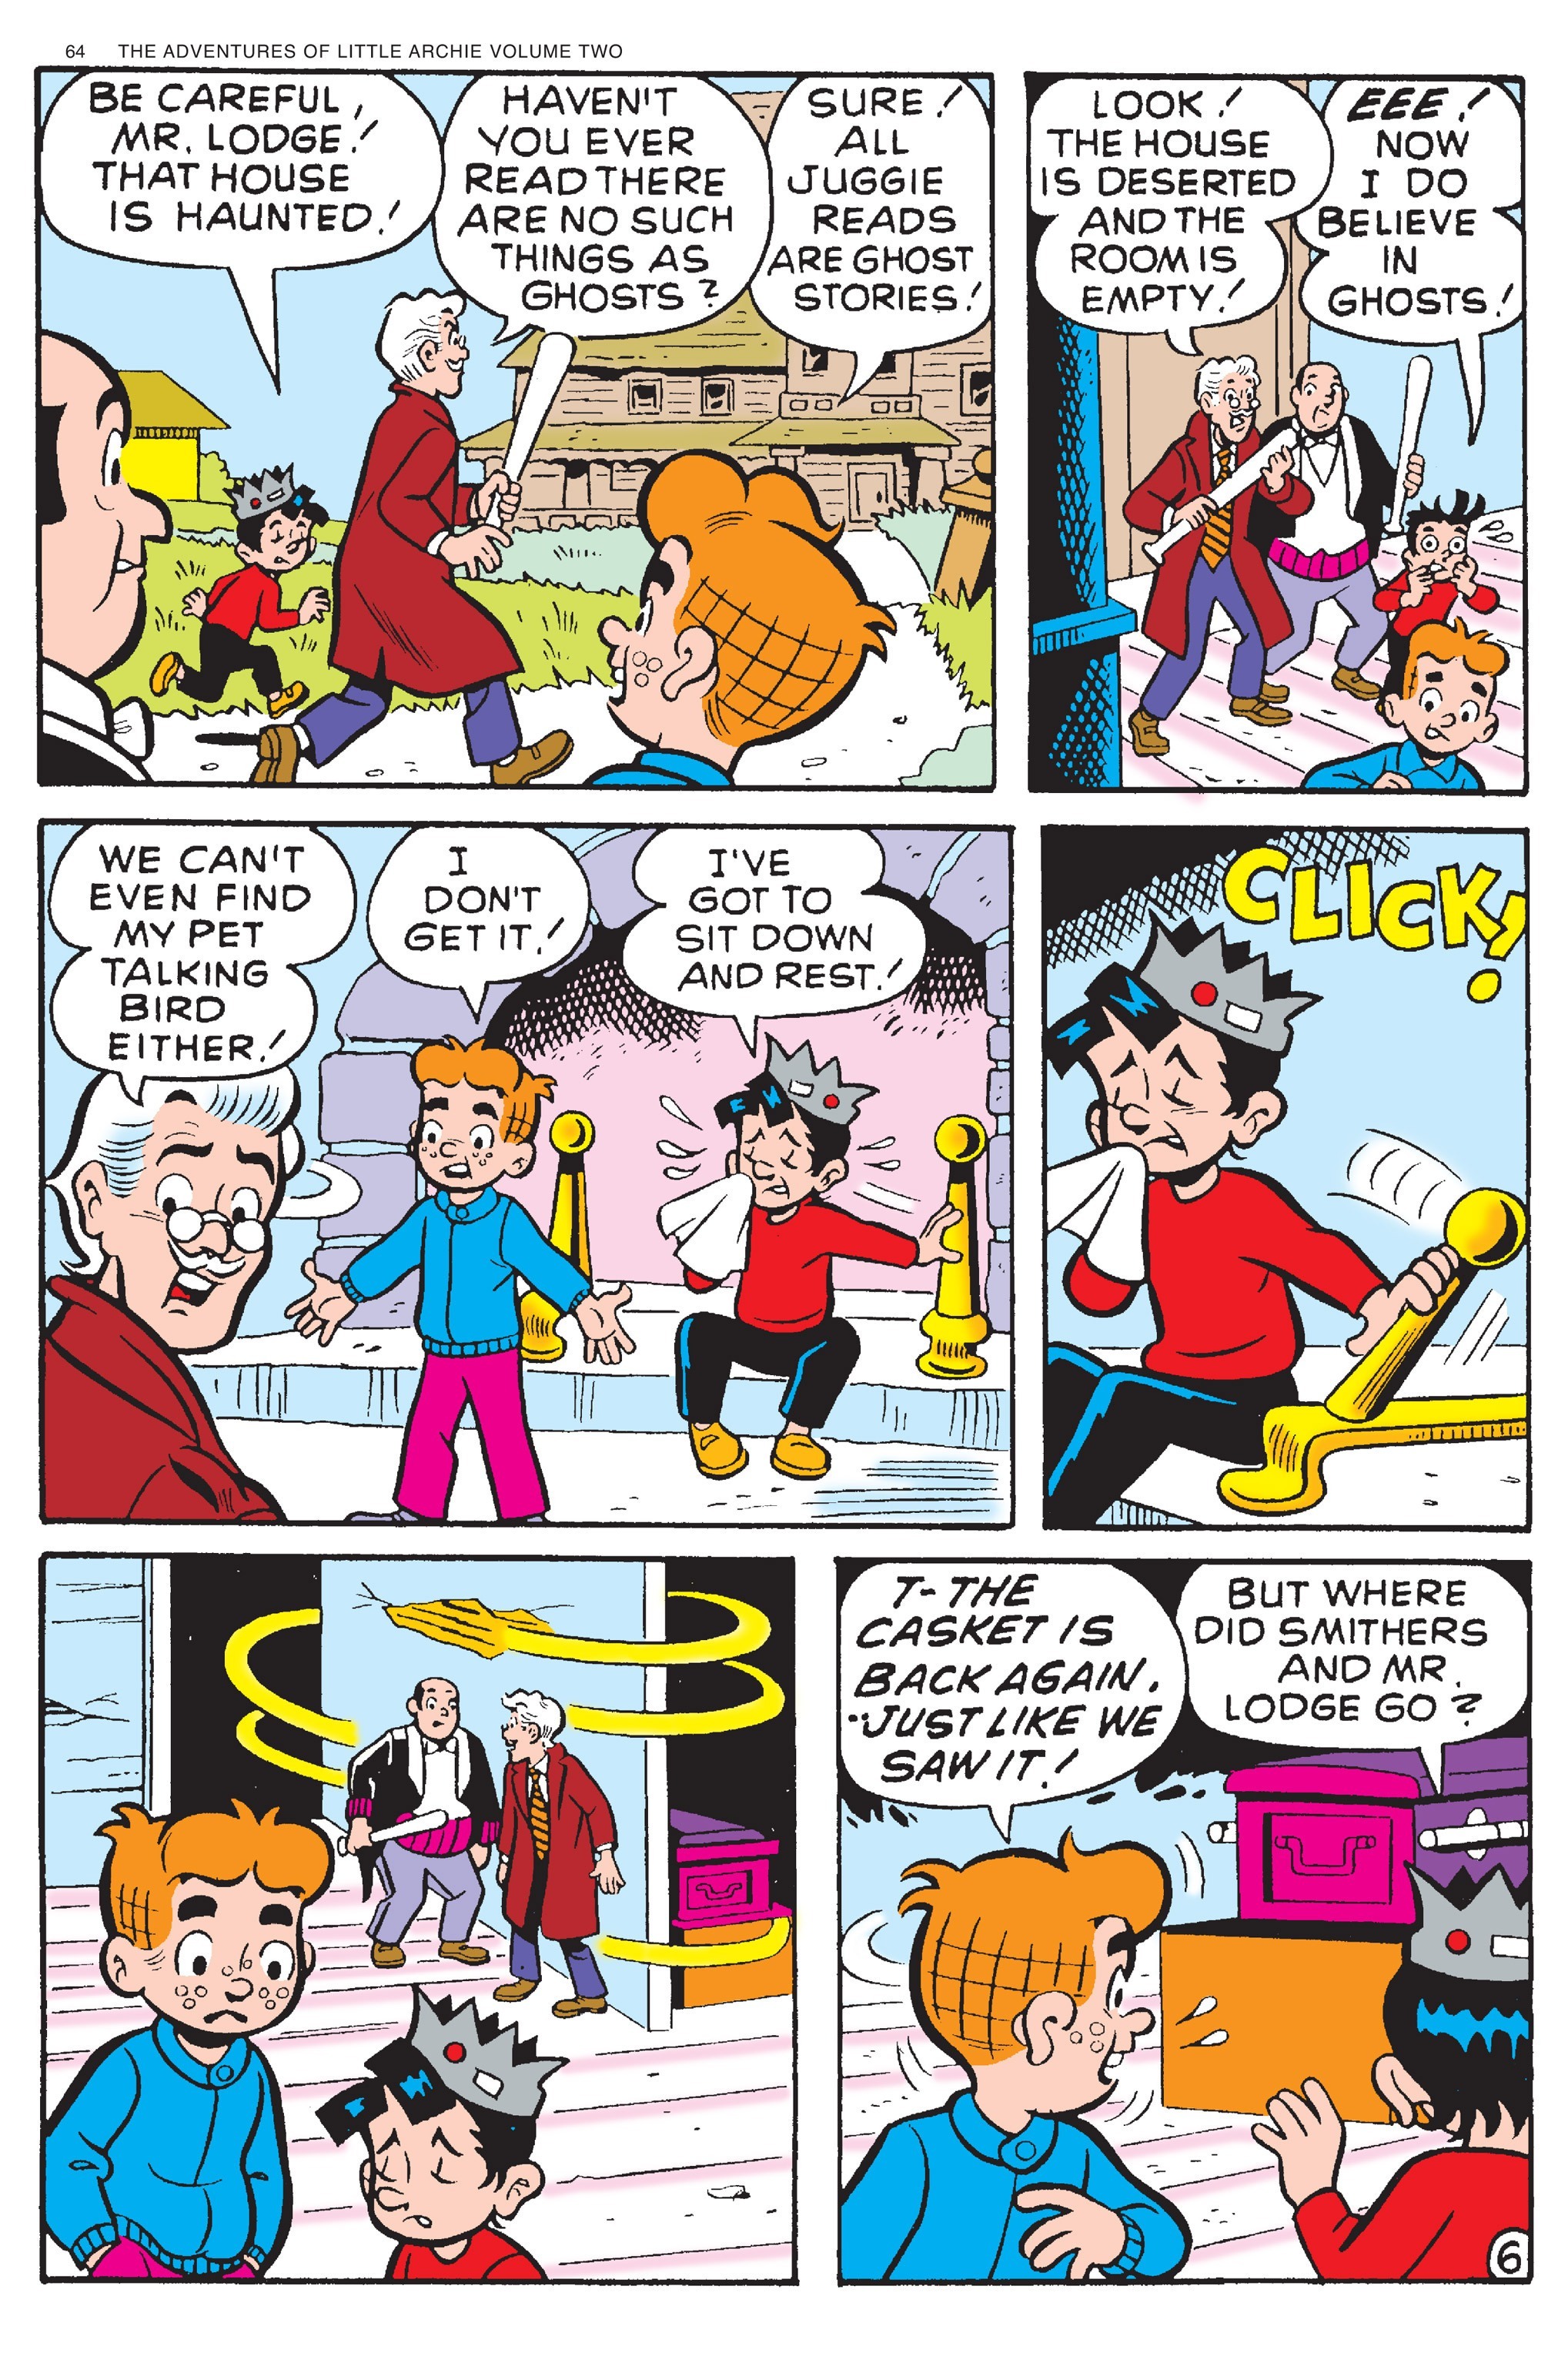 Read online Adventures of Little Archie comic -  Issue # TPB 2 - 65